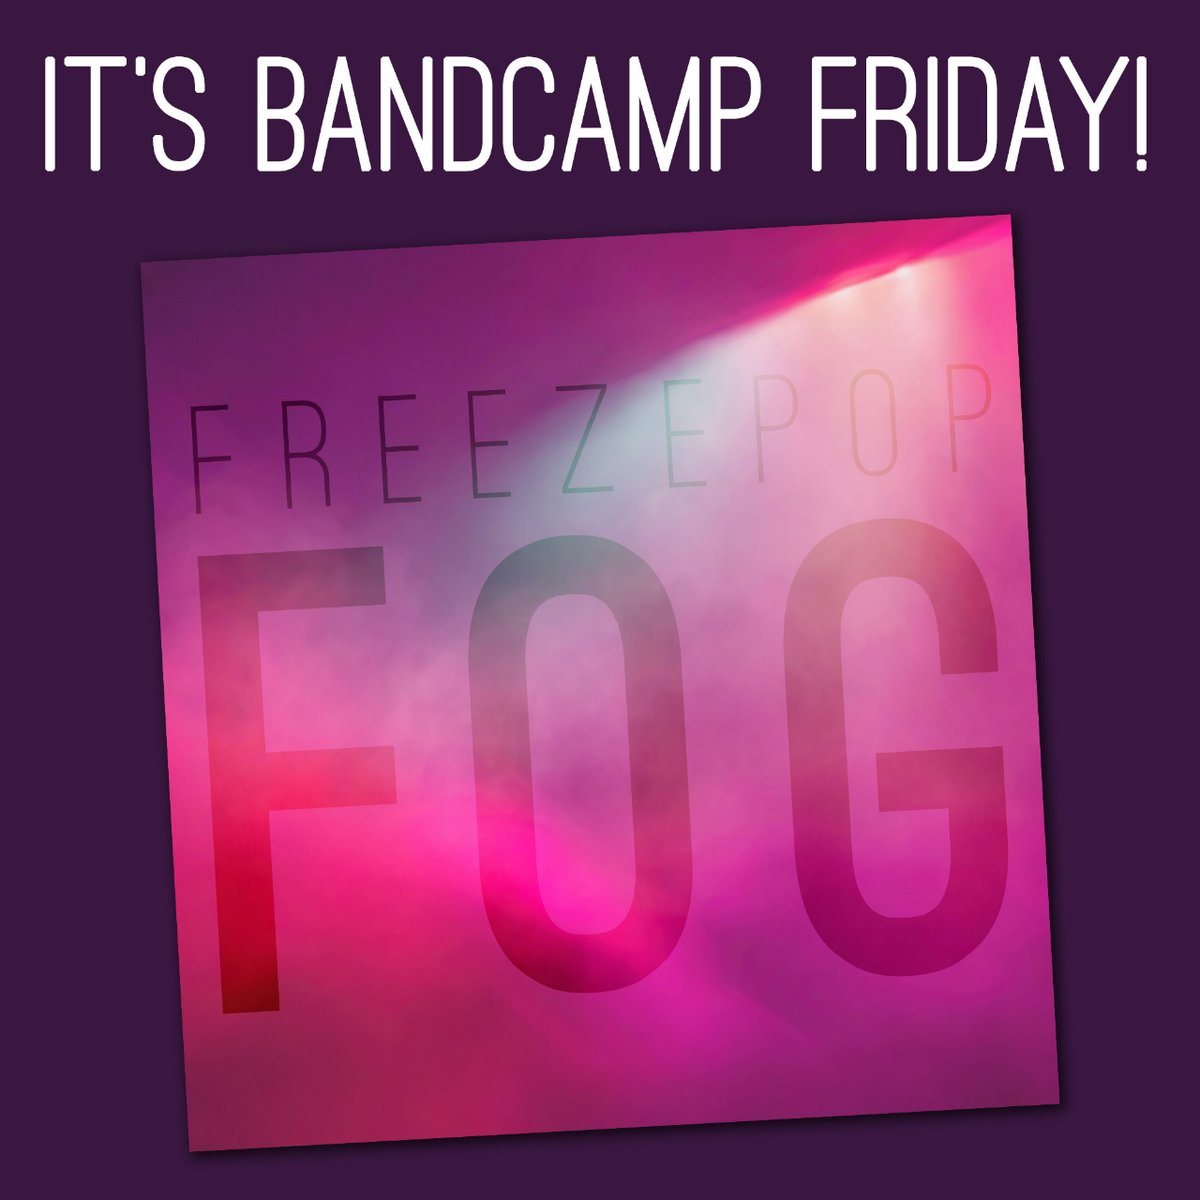 It’s #bandcampfriday! The perfect time to pick up our new album, Fog. Thanks for all the love we've been getting on this new release 💜💜 Link in bio!
#supportindiemusic #indieelectronic #synthesizers #newmusic #techno #electronicmusic #womeninmusic #bostonmusic #newrelease